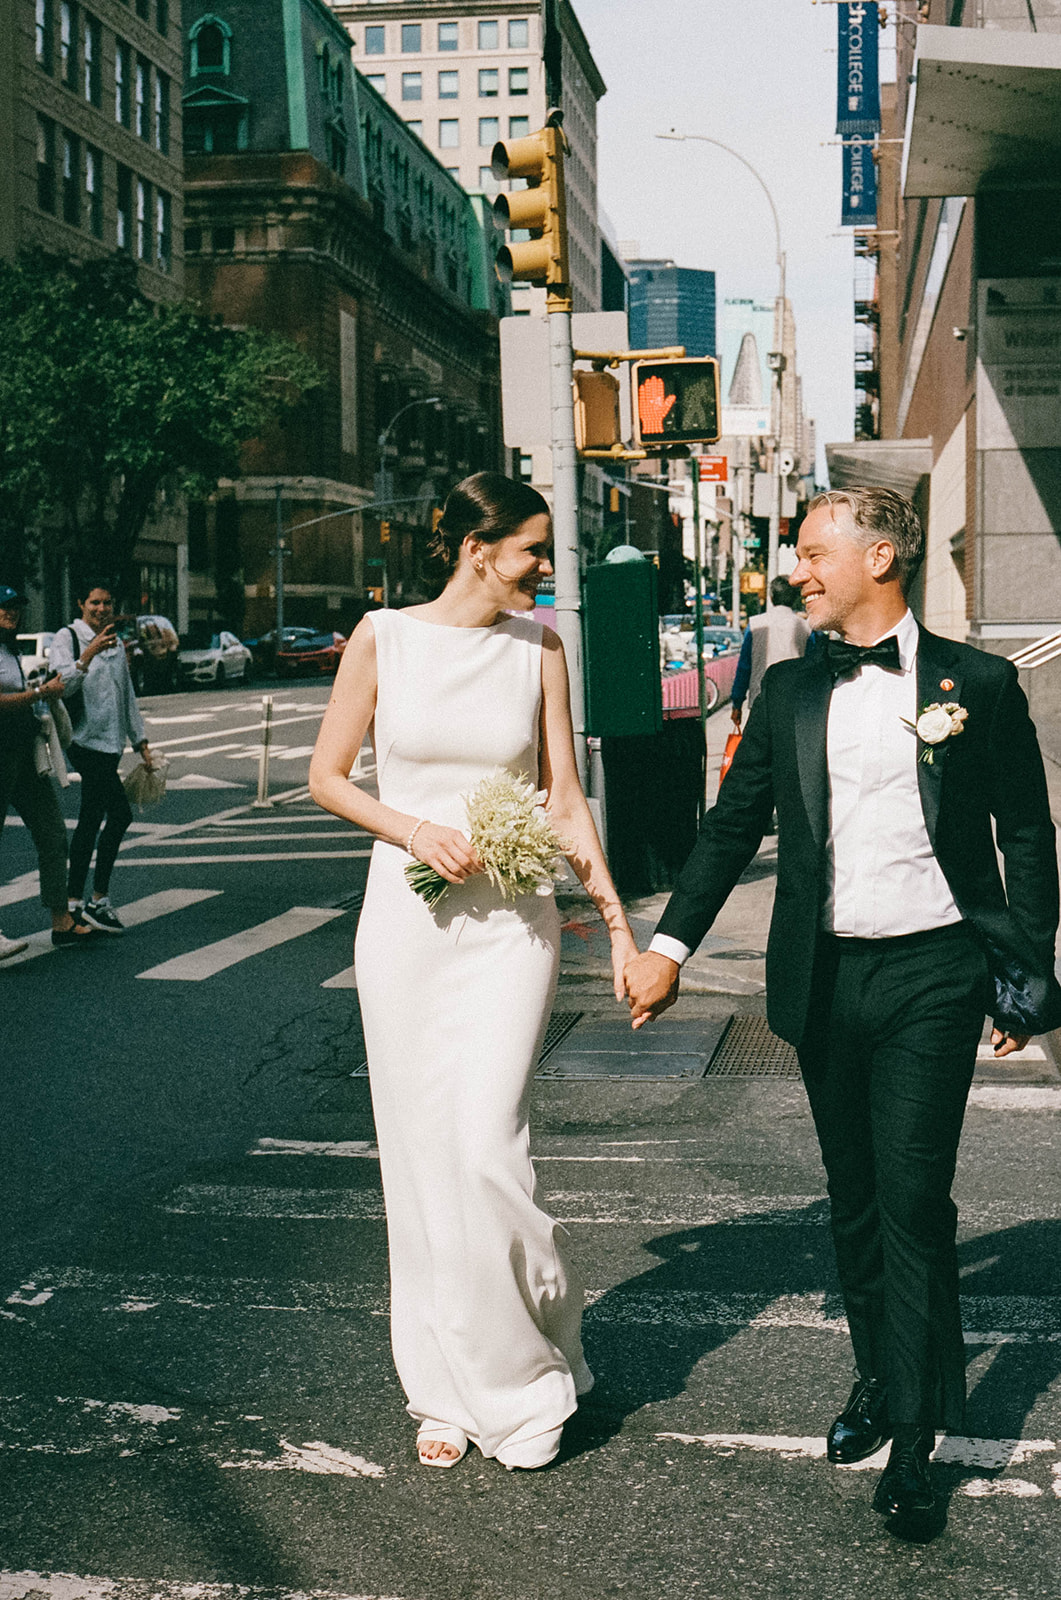 A Freehand Hotel Wedding in Manhattan, NYC shot by weddings by nato